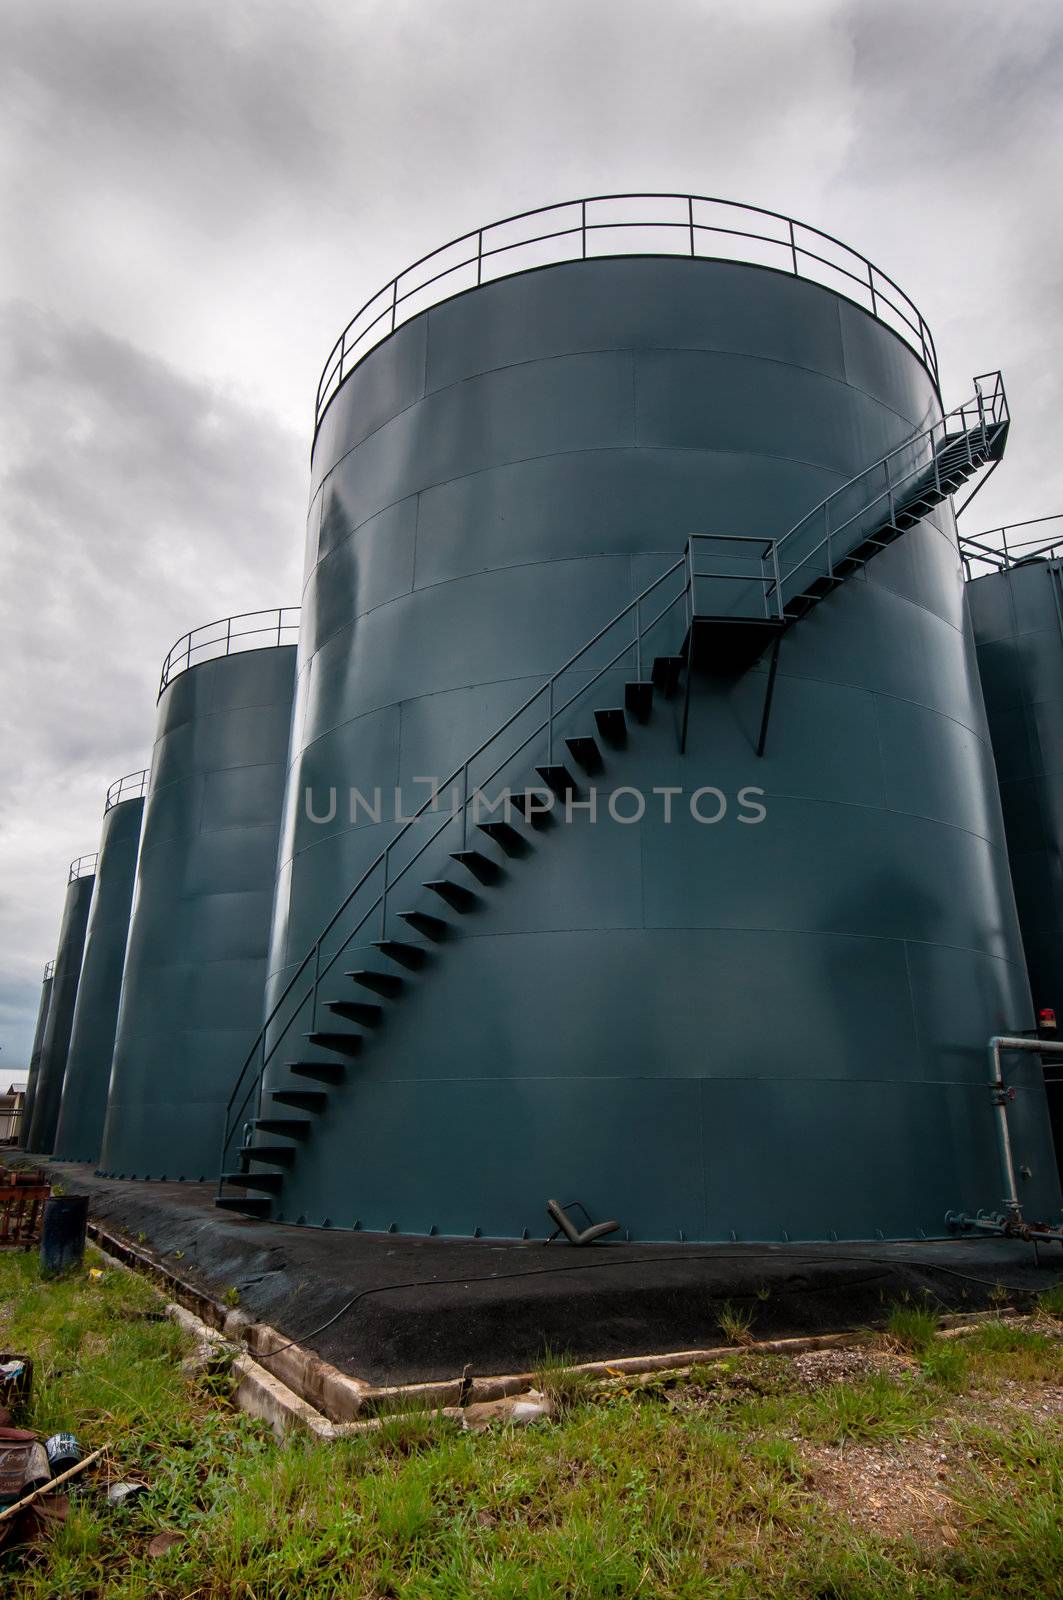  Vertical picture of  storage tanks and ladder on cloudy background